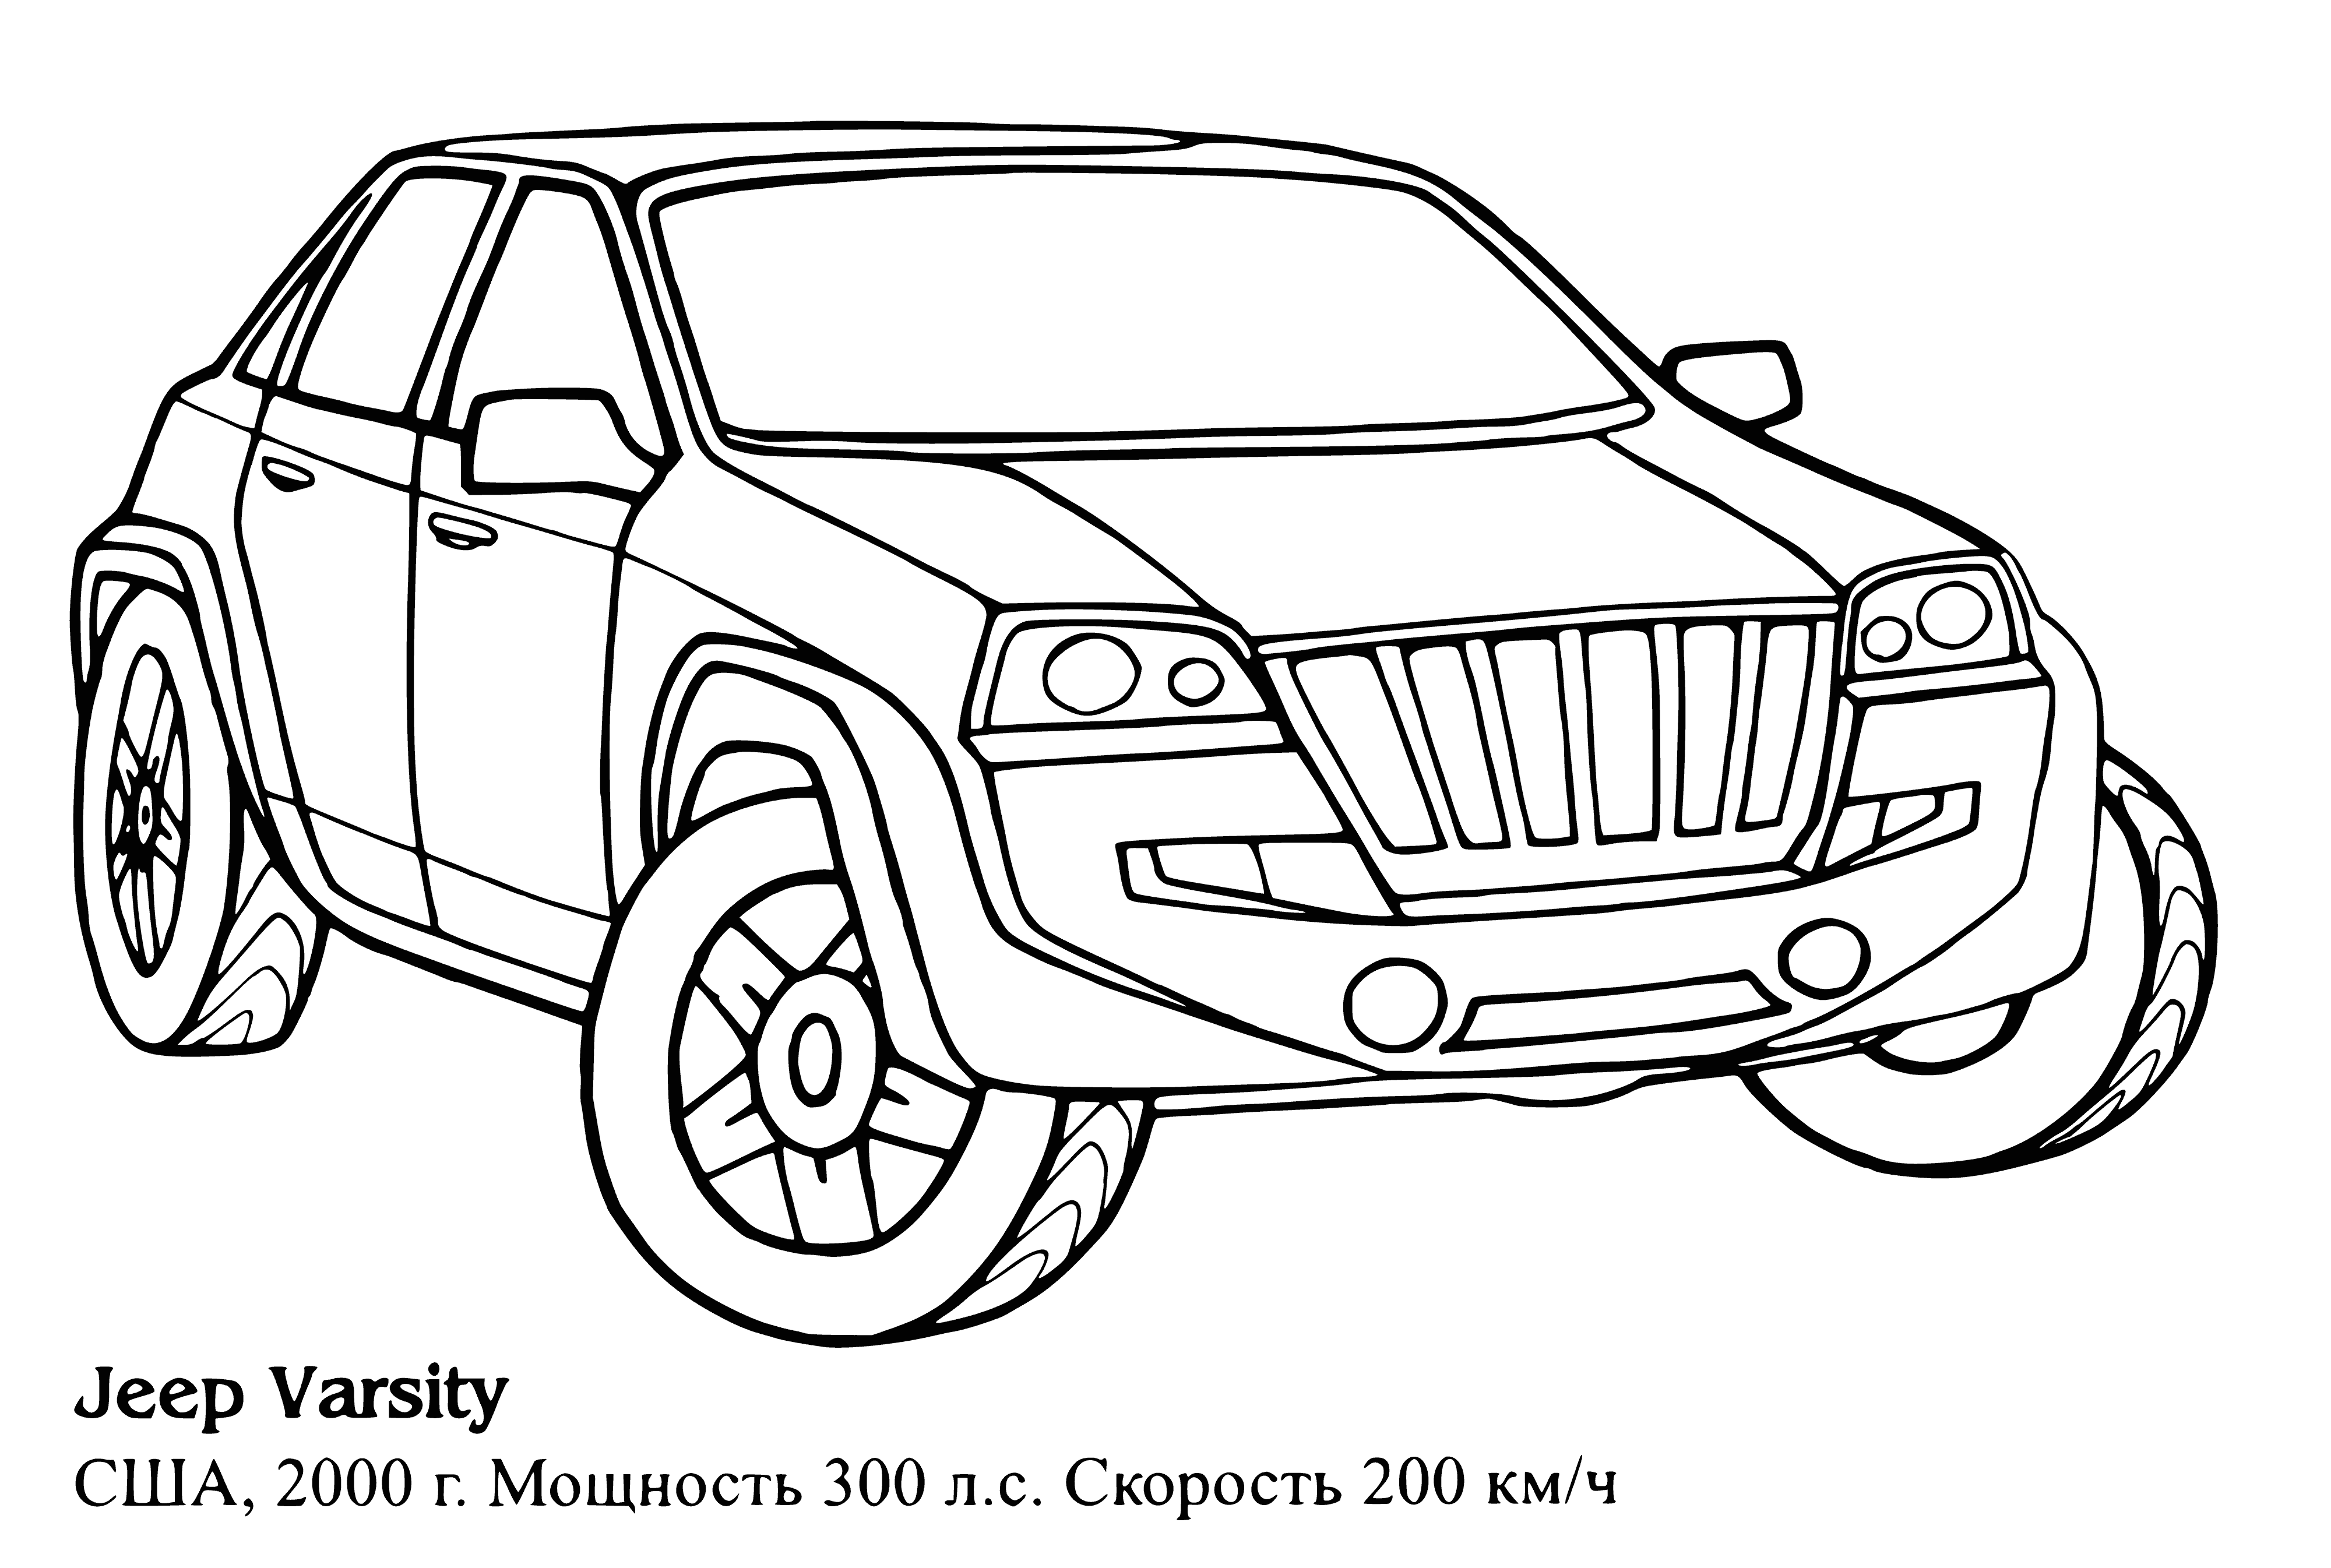 Jeep Varsity coloring page